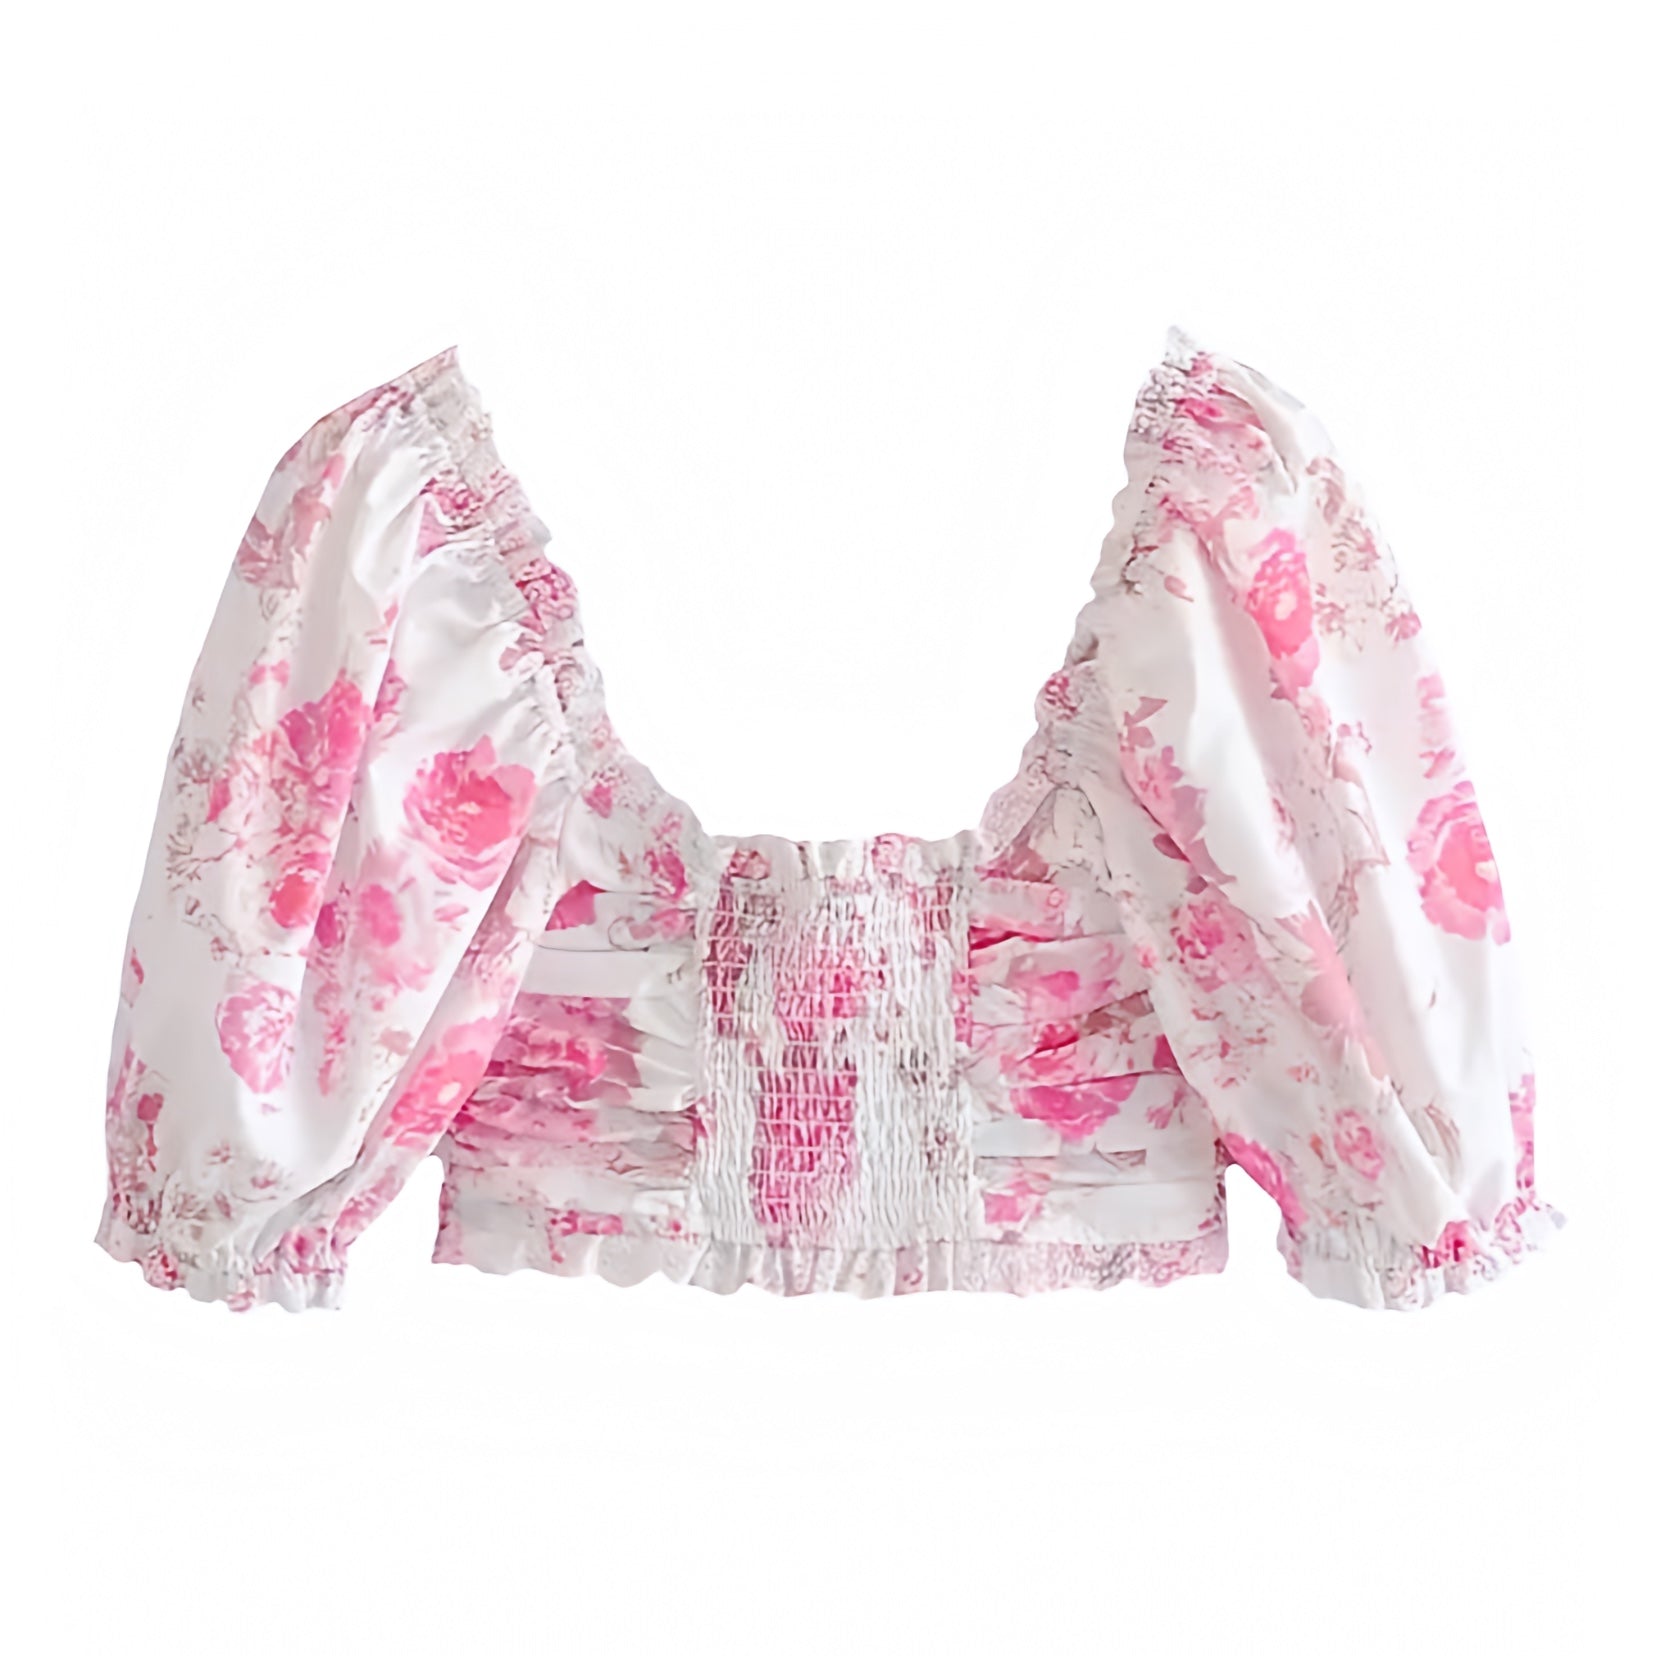 floral-print-hot-pink-and-white-rose-flower-patterned-ruffle-trim-lace-up-corset-bustier-slim-fit-short-puff-sleeve-sweetheart-neckline-crop-top-blouse-shirt-women-ladies-chic-trendy-spring-2024-summer-elegant-semi-formal-casual-classy-feminine-preppy-style-zara-revolve-altard-state-princess-polly-loveshackfancy-urban-outfitters-fillyboo